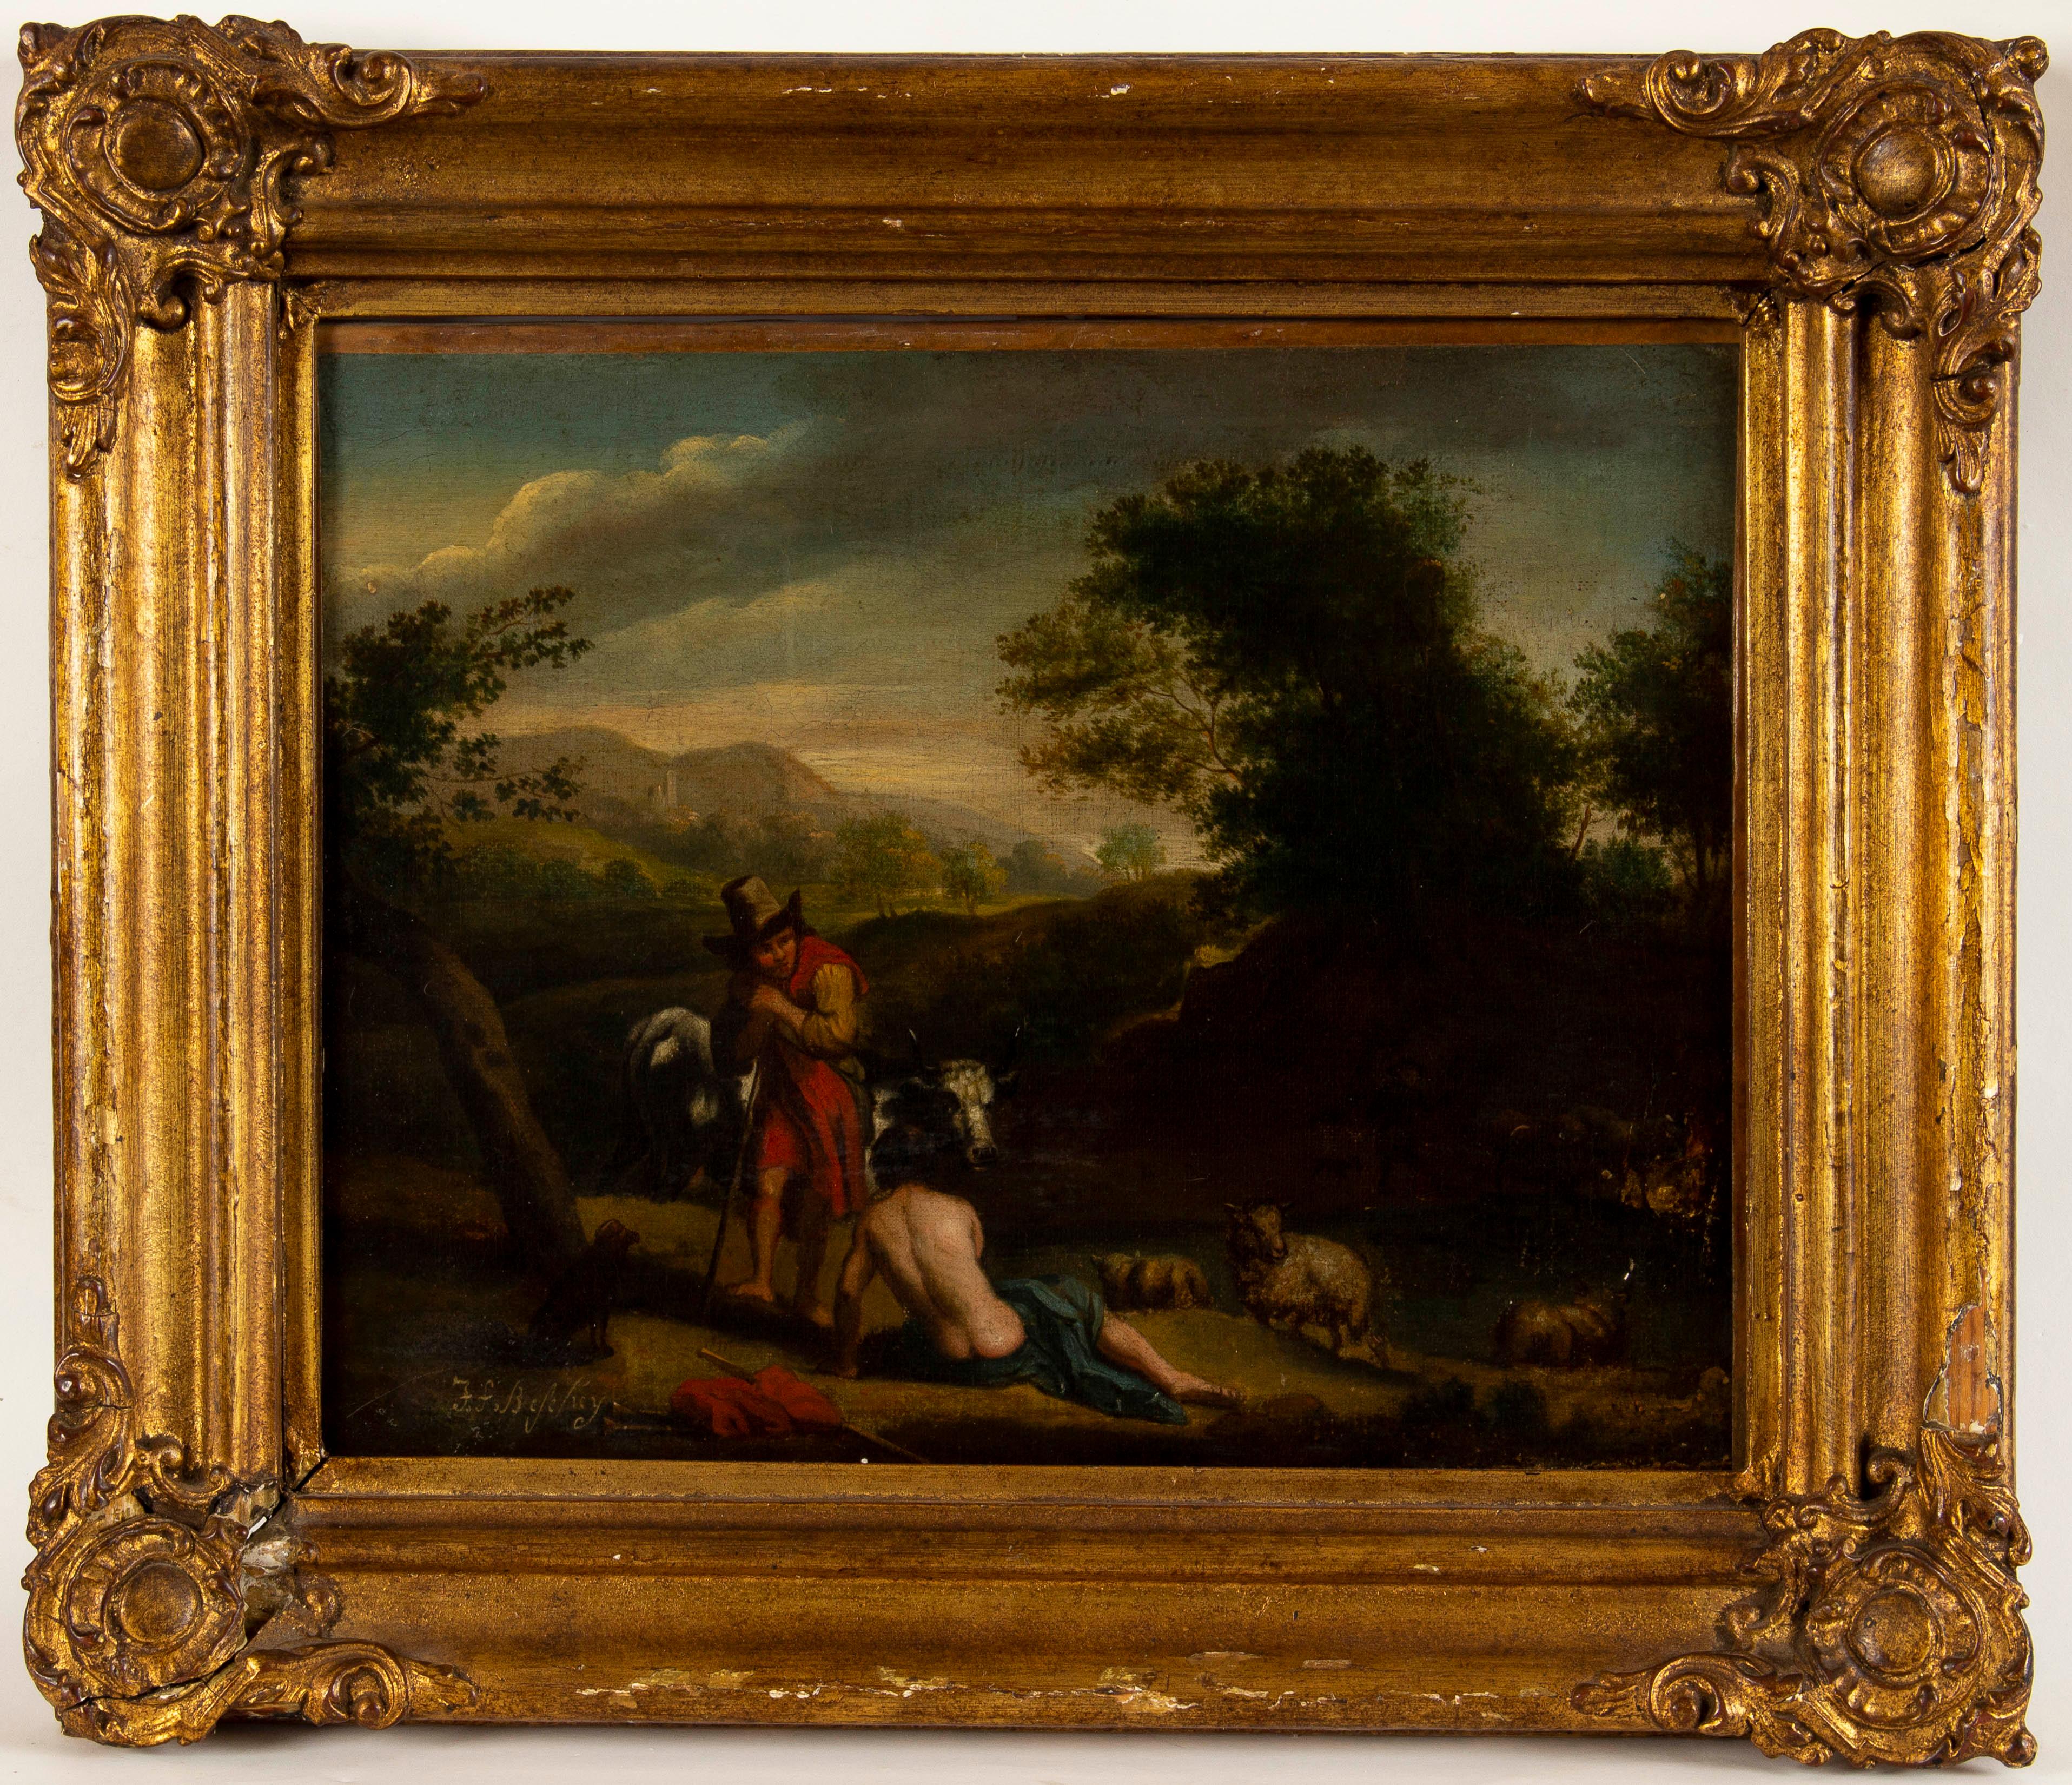 Exquisite antique Arcadia Scene with Shepherds, by flemmish painter Jan Frans Beschey (Antwerp, 1717-1786).
Signed bottom left: J. F. Beschey
In antique carved wood frame.
Net size: 30,5 x 36,5 cm
Size with frame: 42 x 49 cm.